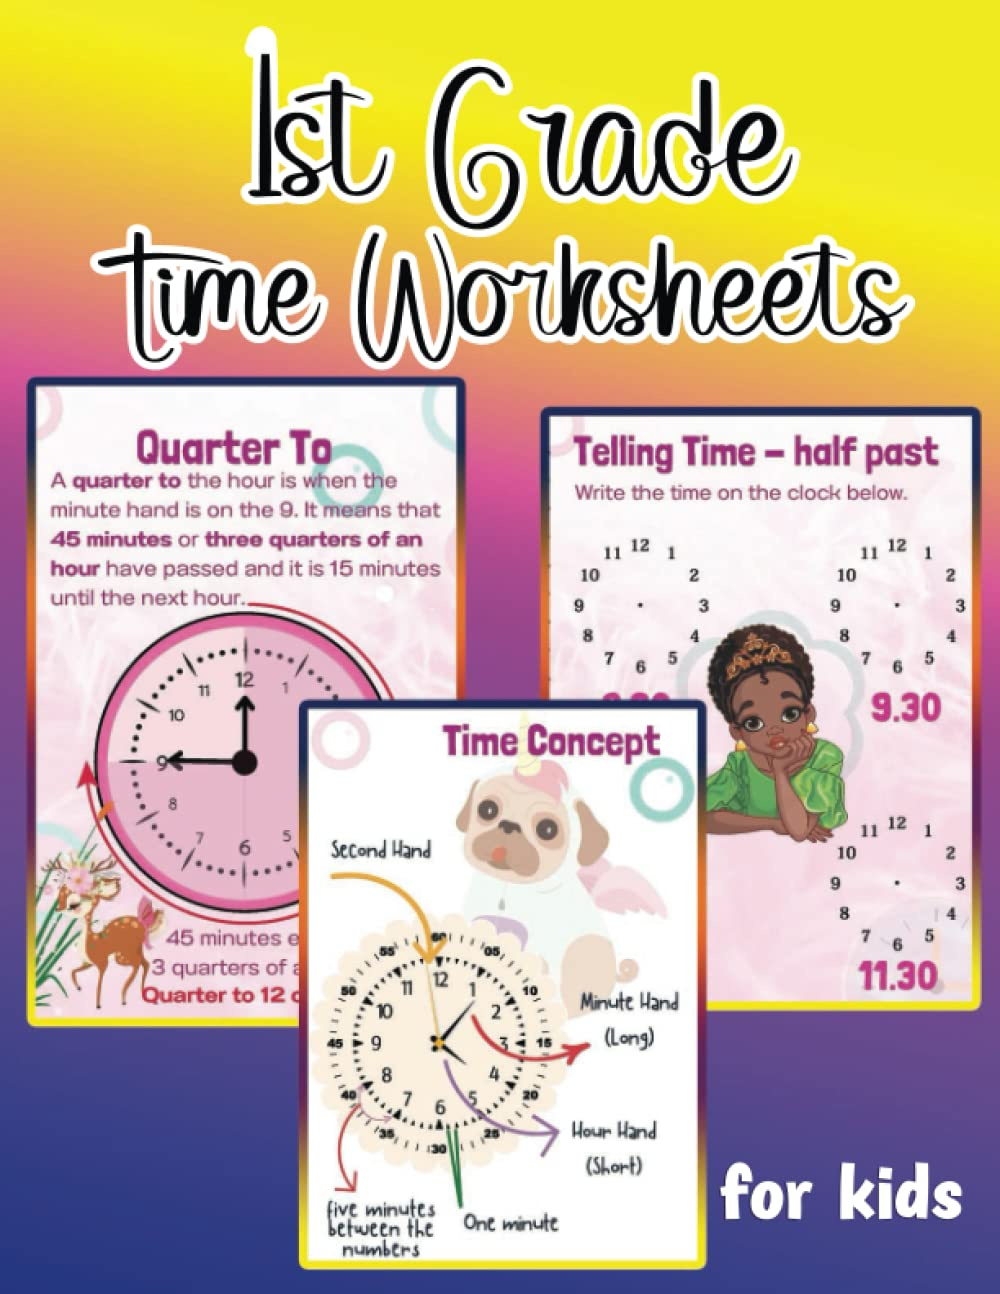 1st-grade-time-worksheets-book-teaching-materials-learning-by-adam-on